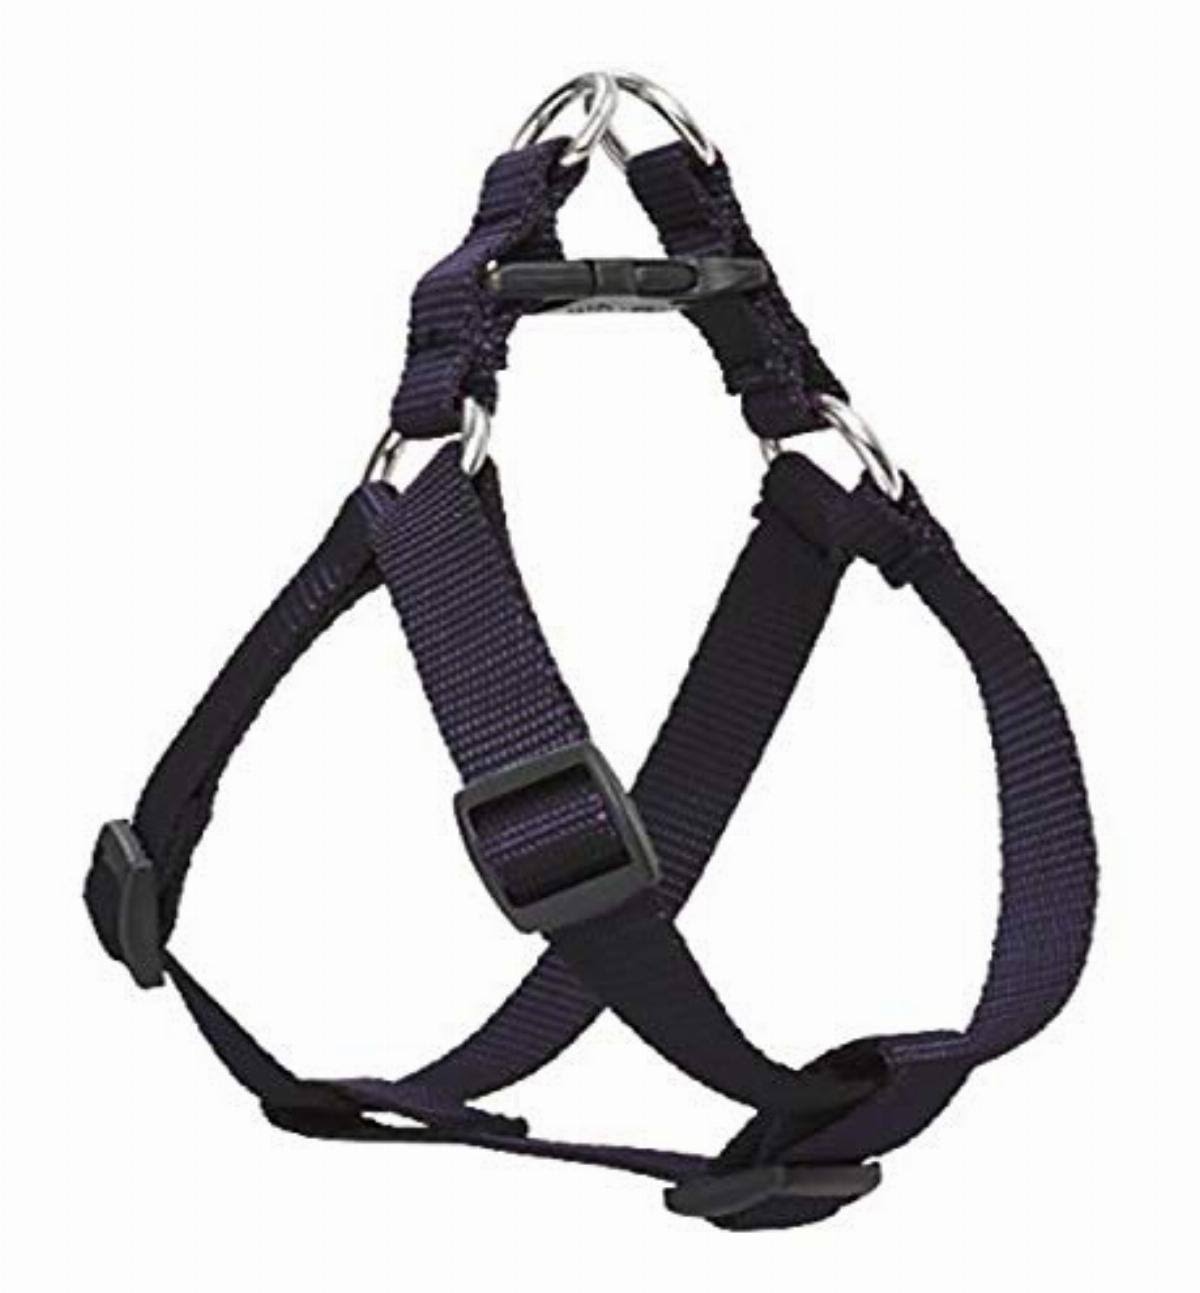 Lupinepet Dog Harness - 3/4", Black, for Medium Dogs